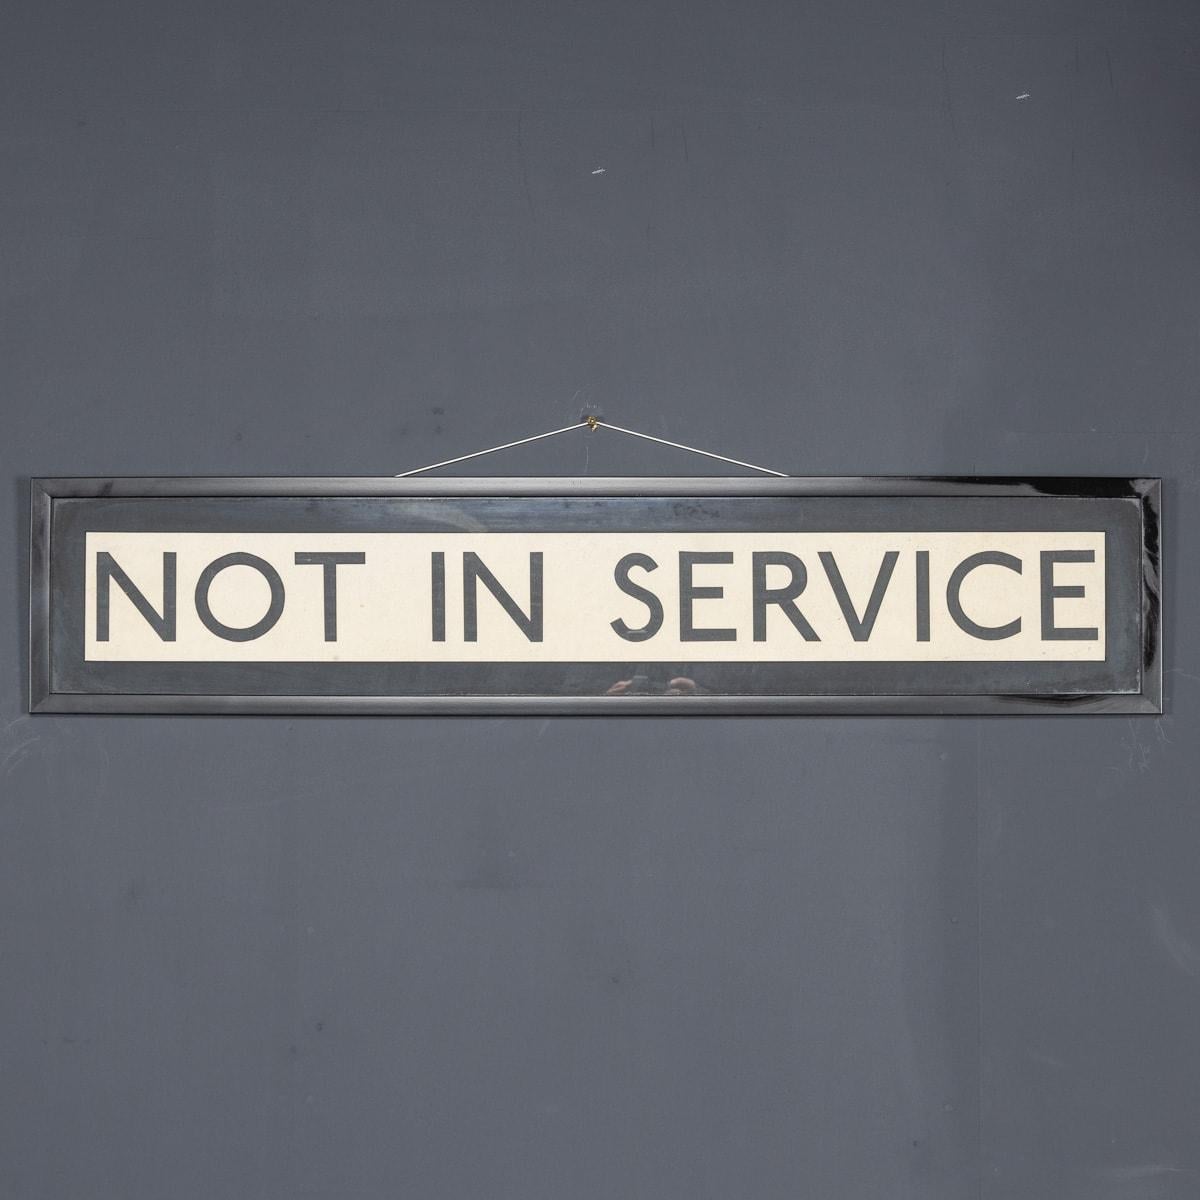 A wonderful mid 20th Century Transport for London sign, hailing from the iconic red route master buses of London. This piece of history is elegantly framed in black. Whether for enthusiasts or as a decorative accent, it's a fabulous addition to any